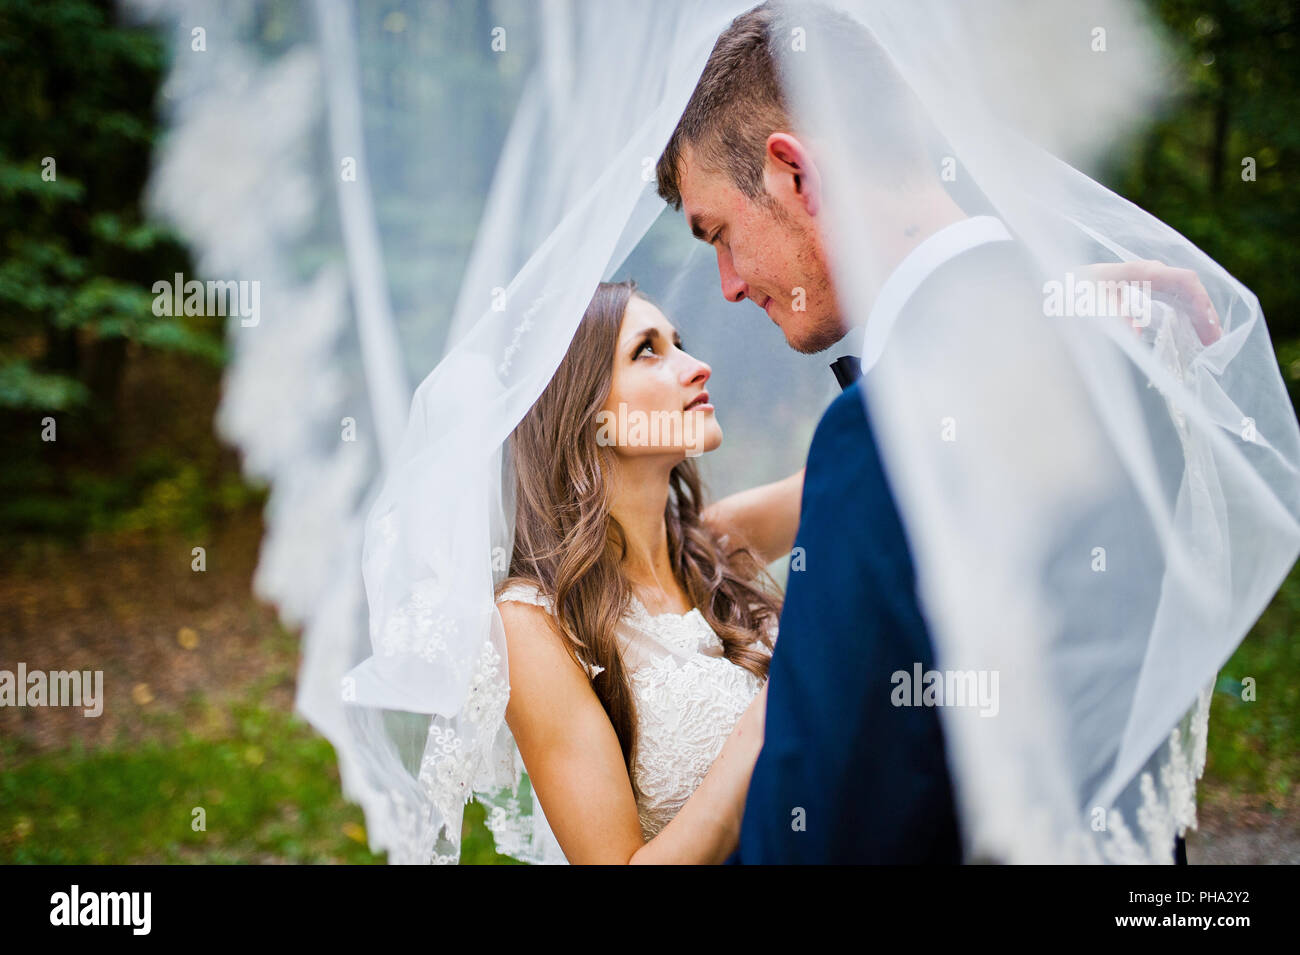 https://c8.alamy.com/comp/PHA2Y2/young-wedding-couple-under-veil-looking-each-other-PHA2Y2.jpg